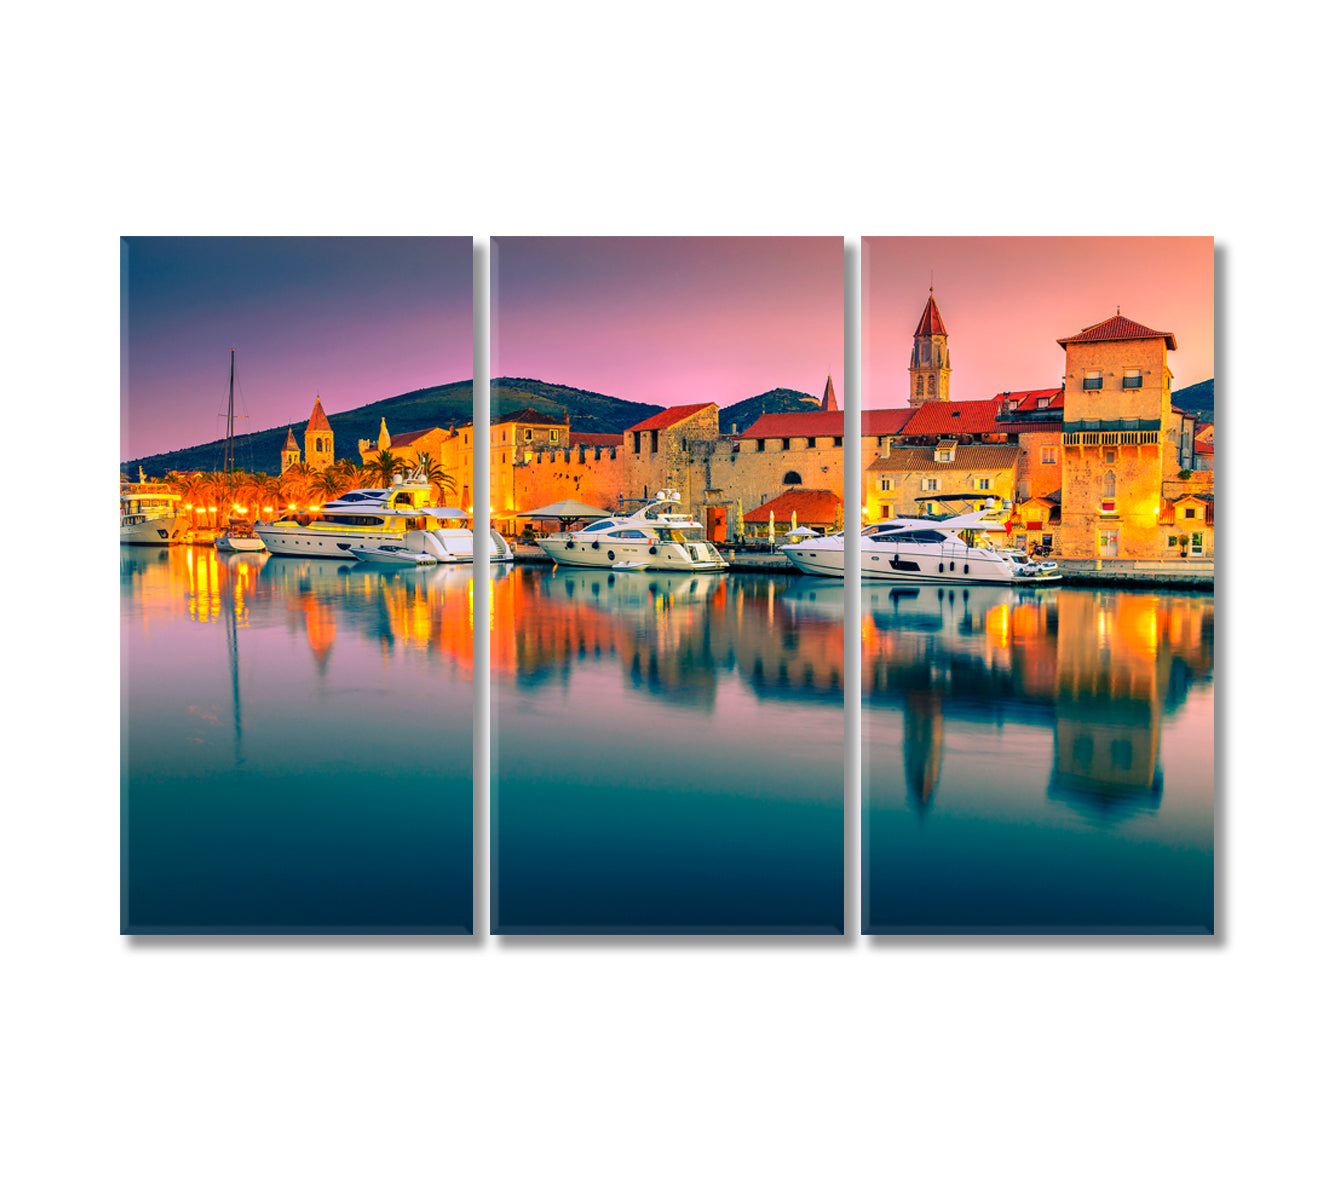 Medieval Old Town Trogir with Harbor and Luxury Yachts Croatia Canvas Print-Canvas Print-CetArt-3 Panels-36x24 inches-CetArt